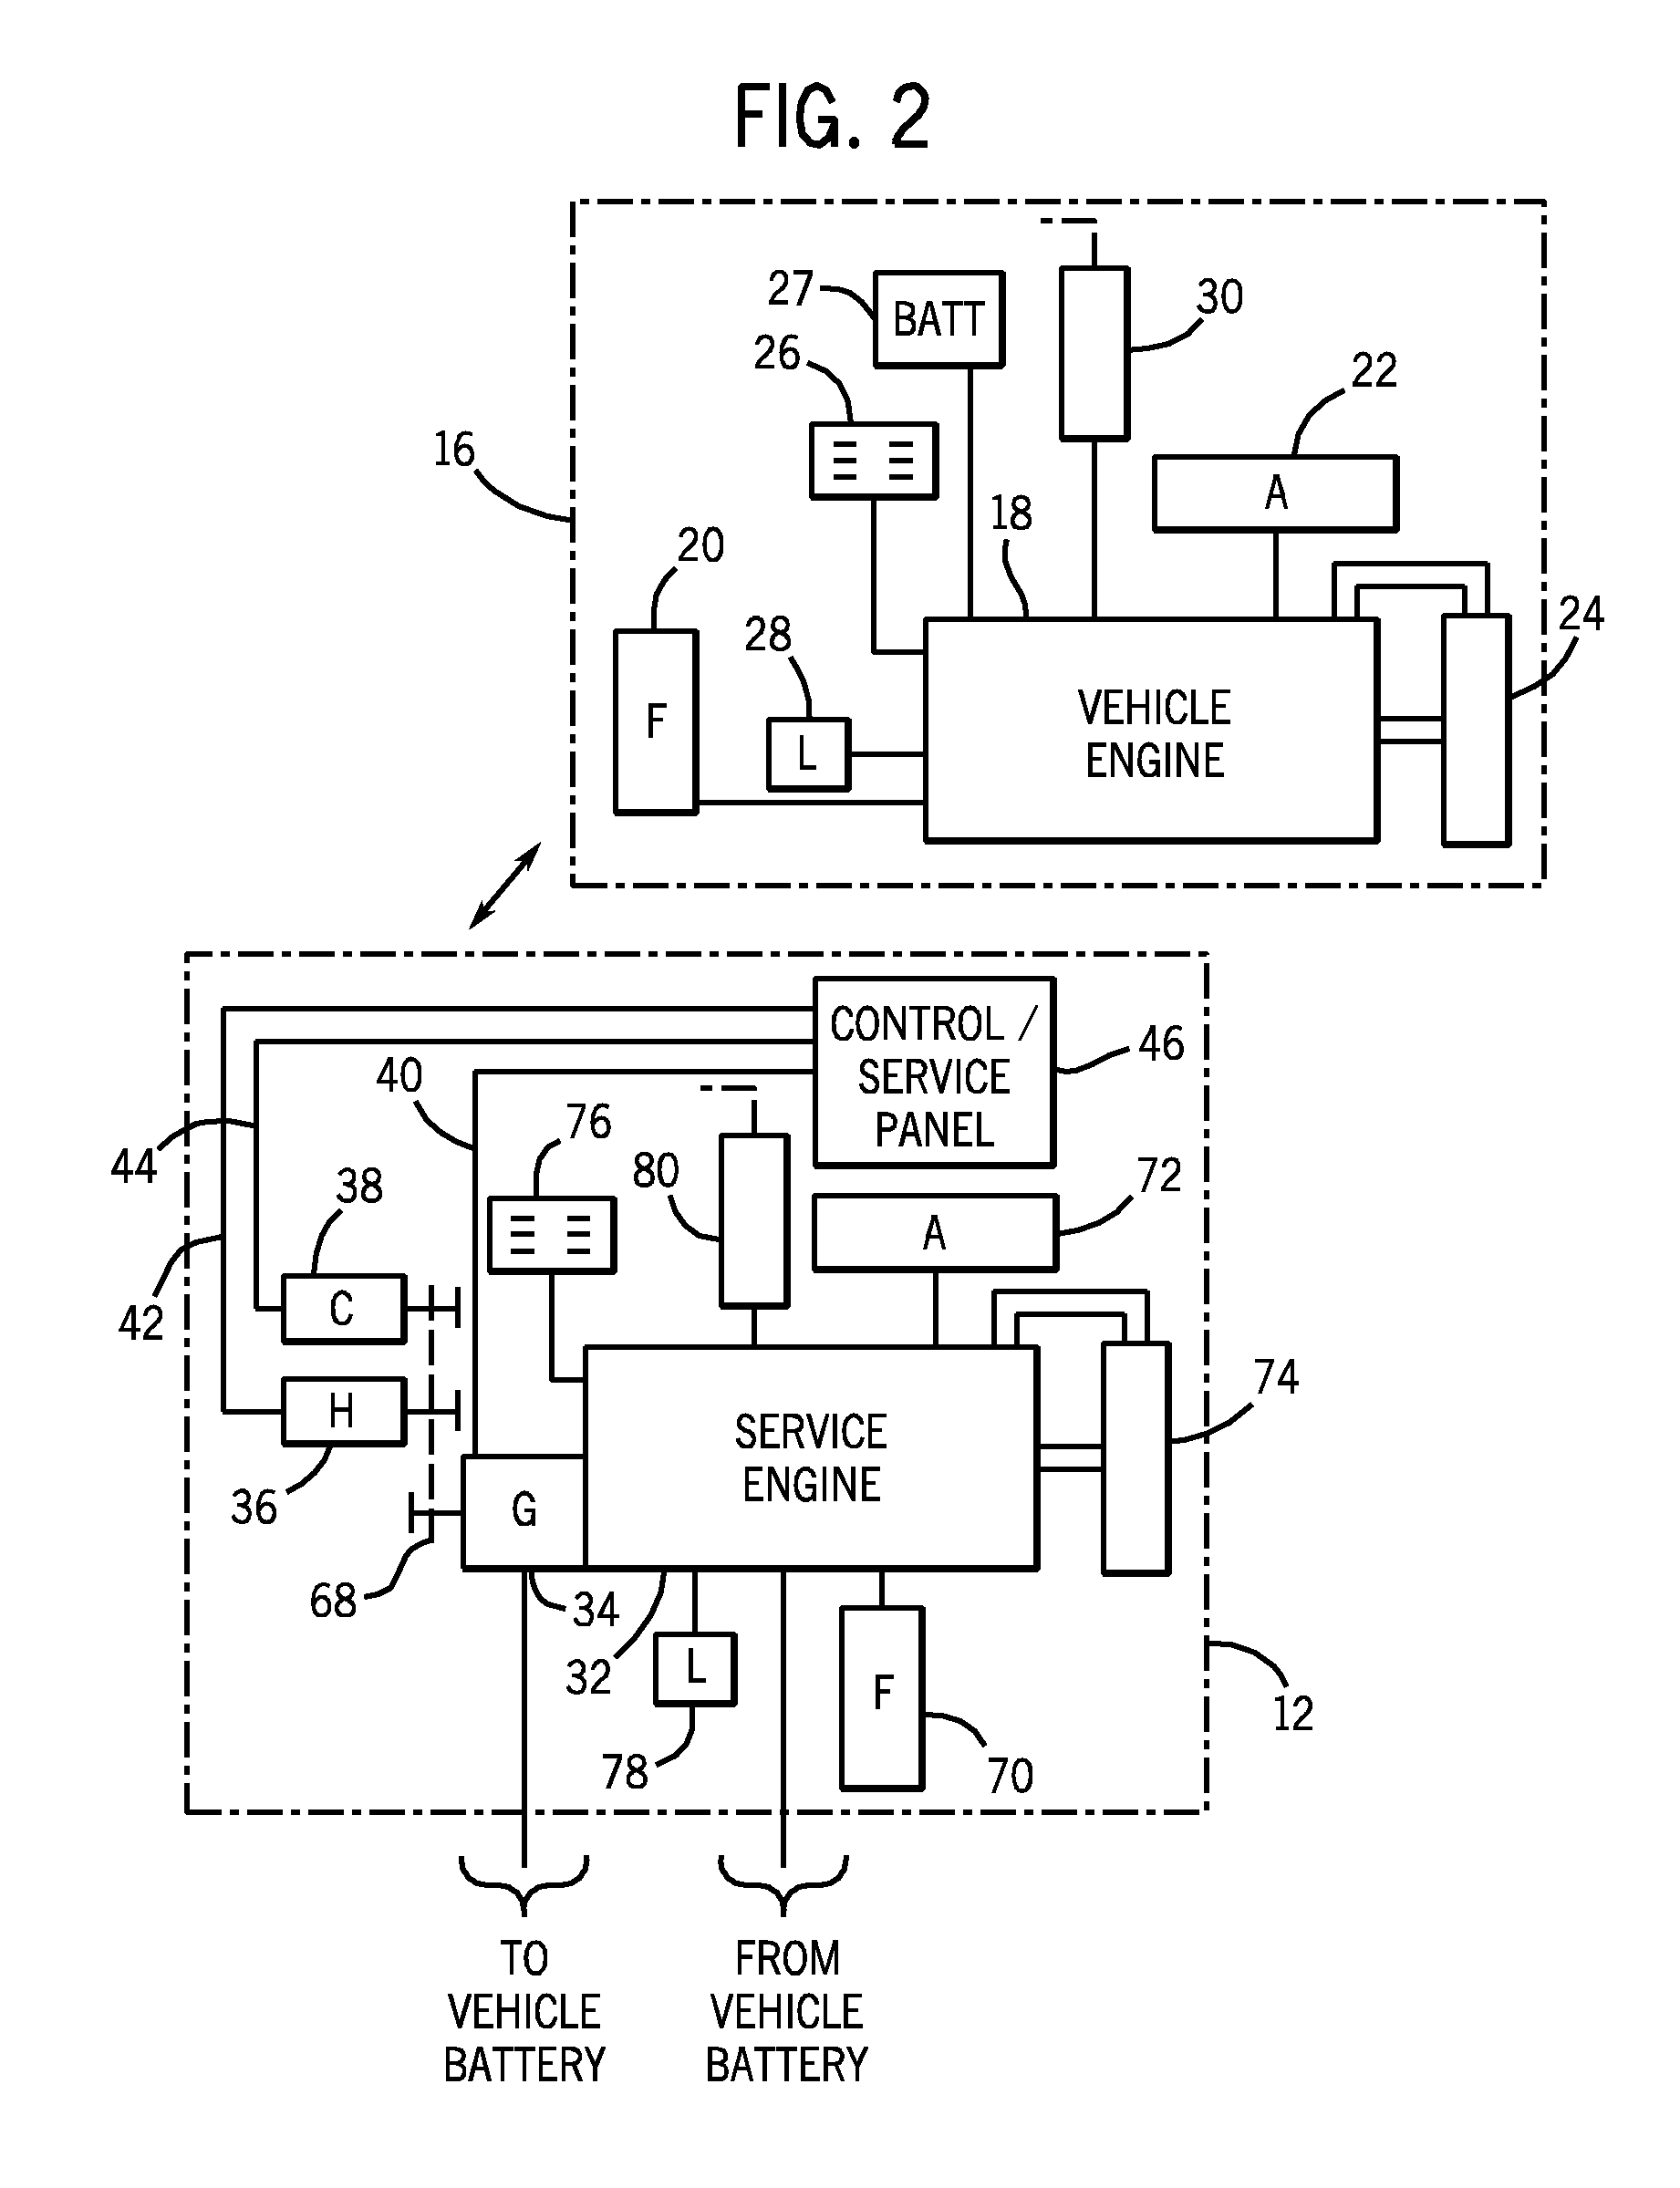 Automatic start and stop of a portable engine driven power source